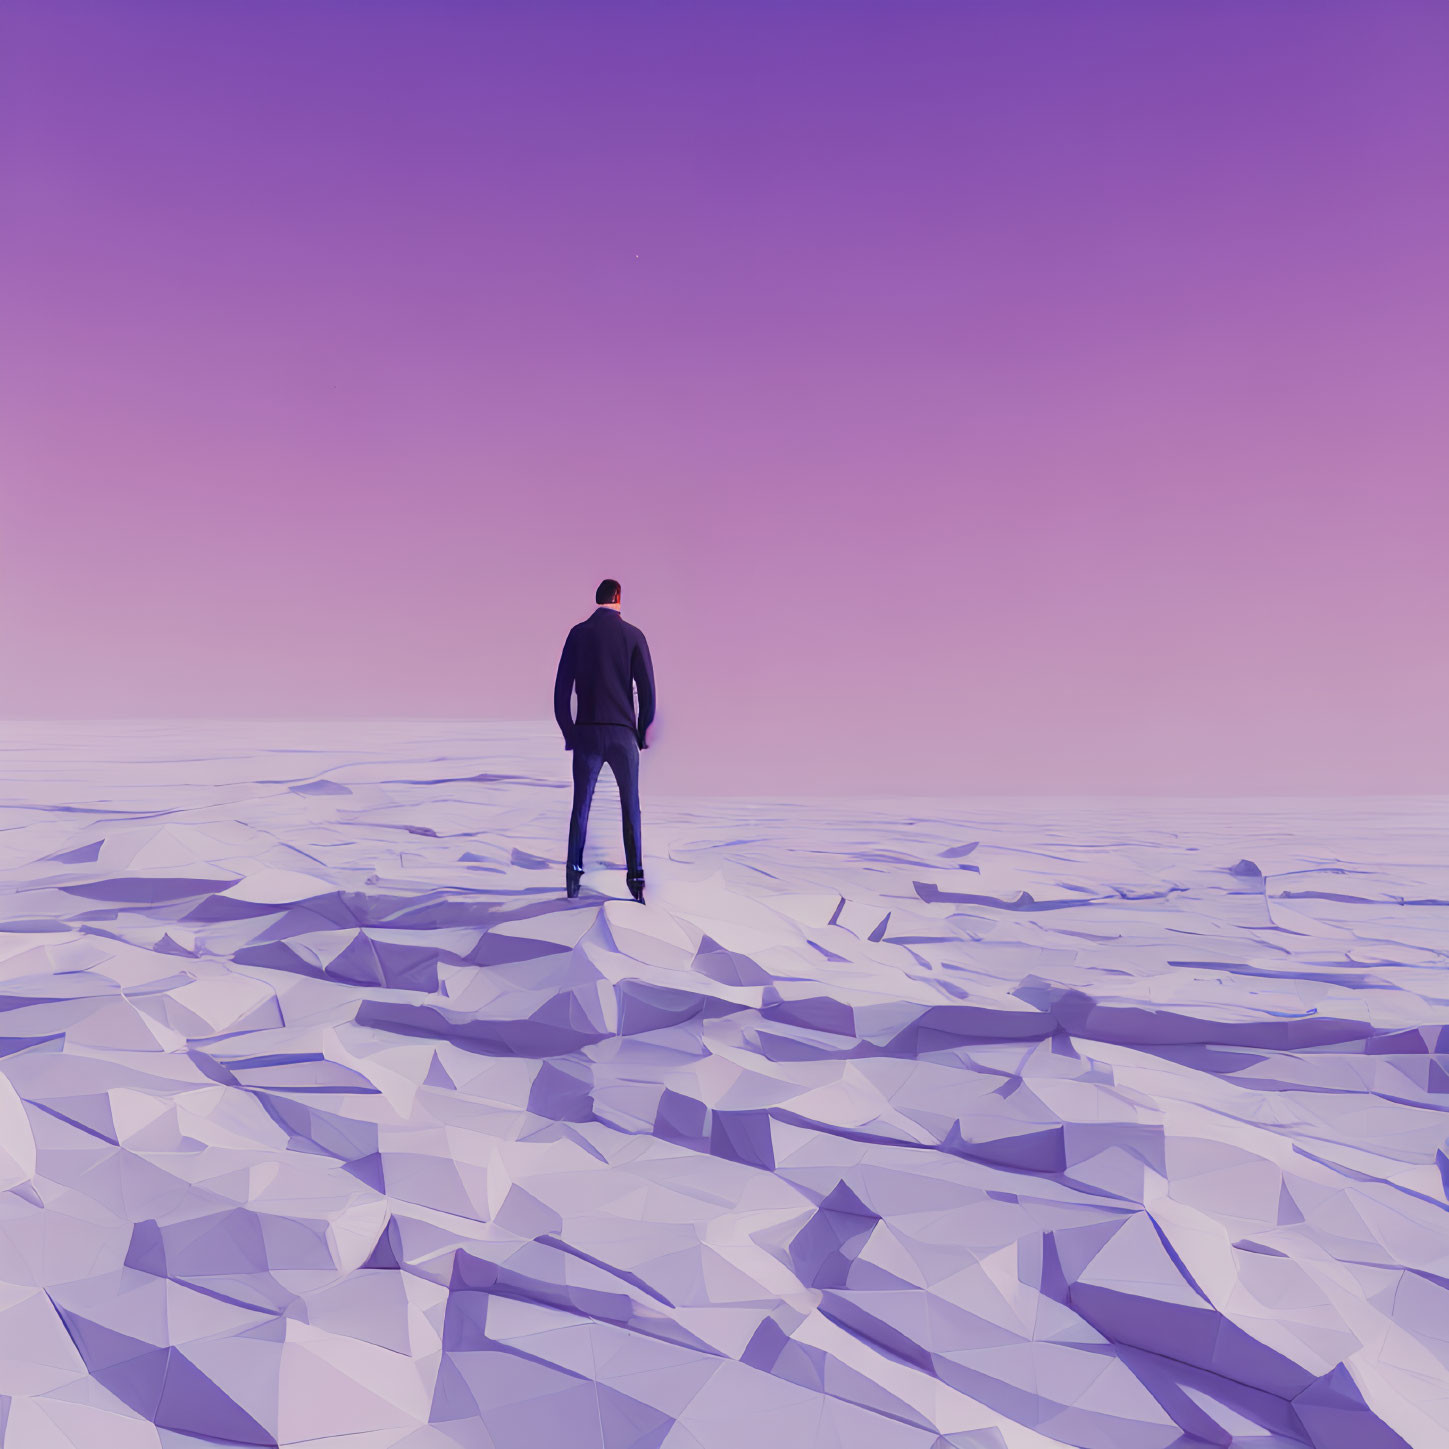 Solitary Figure in Fragmented Purple Landscape